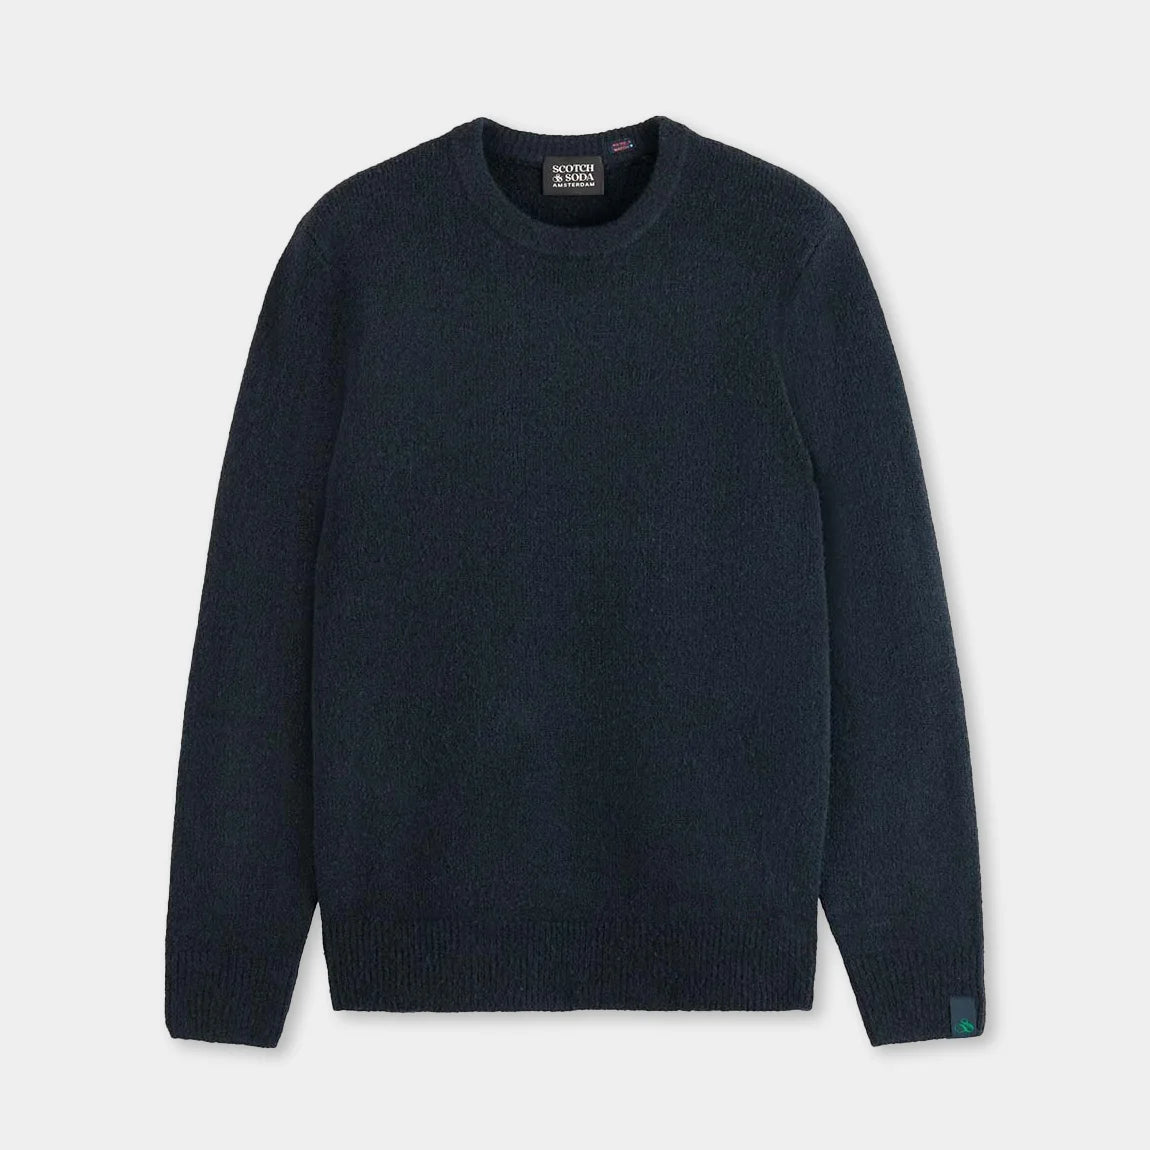 'Scotch & Soda Softy Knit Pullover Sweater' in 'Navy Night' colour